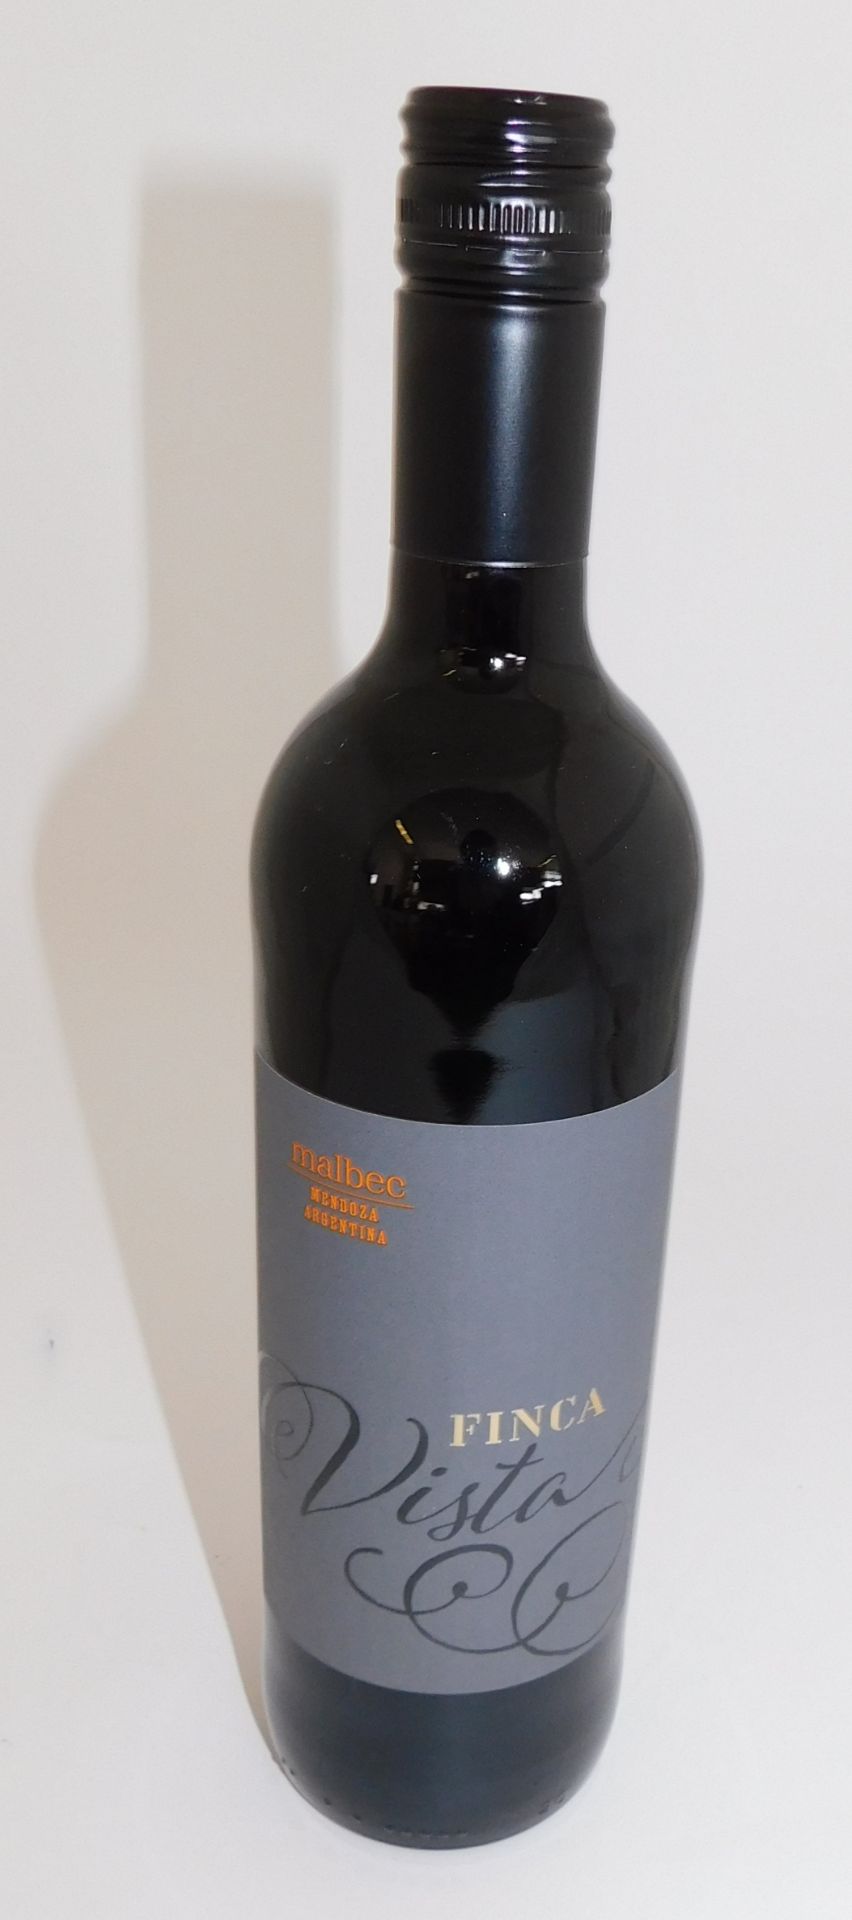 18 Bottles of Finca Vista Malbec, 75cl (Located Stockport – See General Notes for More Details)